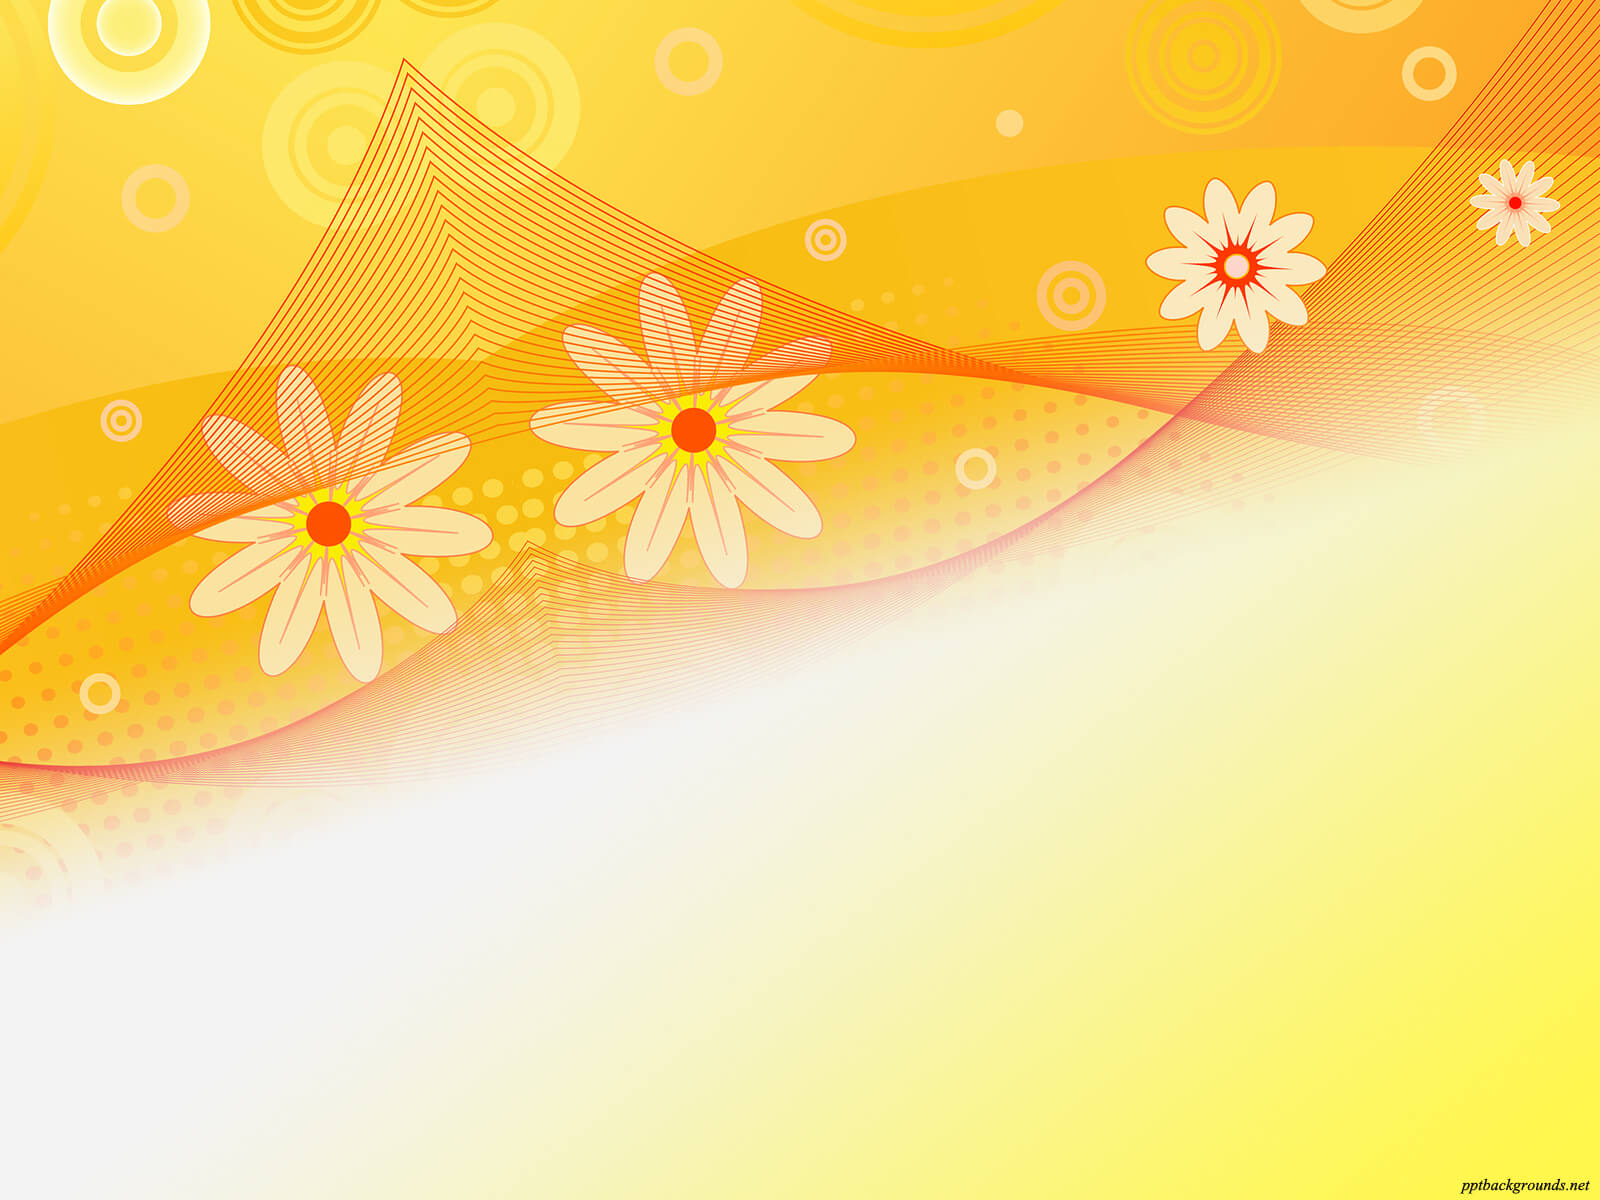 Sunflower Abstract Beauty Backgrounds For Powerpoint Inside Pretty Powerpoint Templates